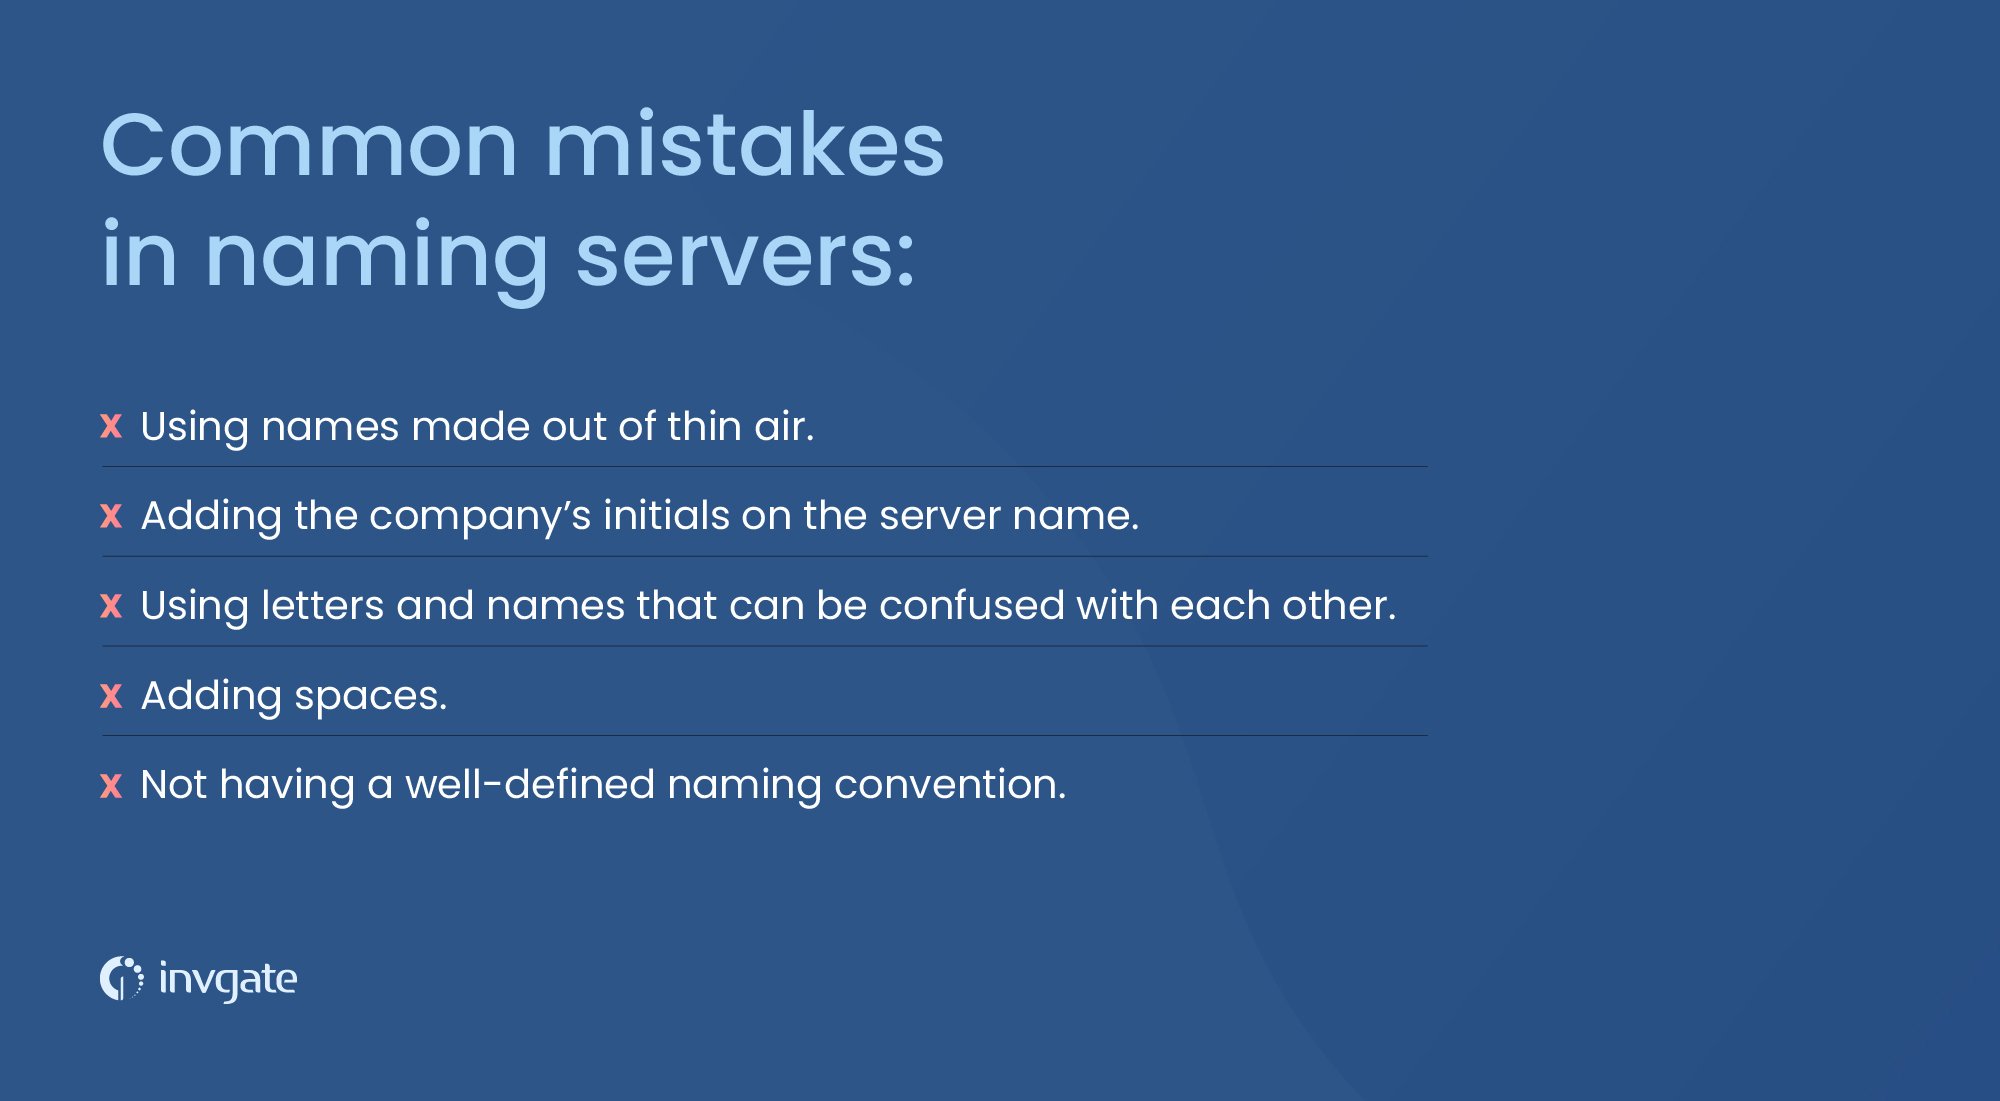 Common mistakes in naming servers